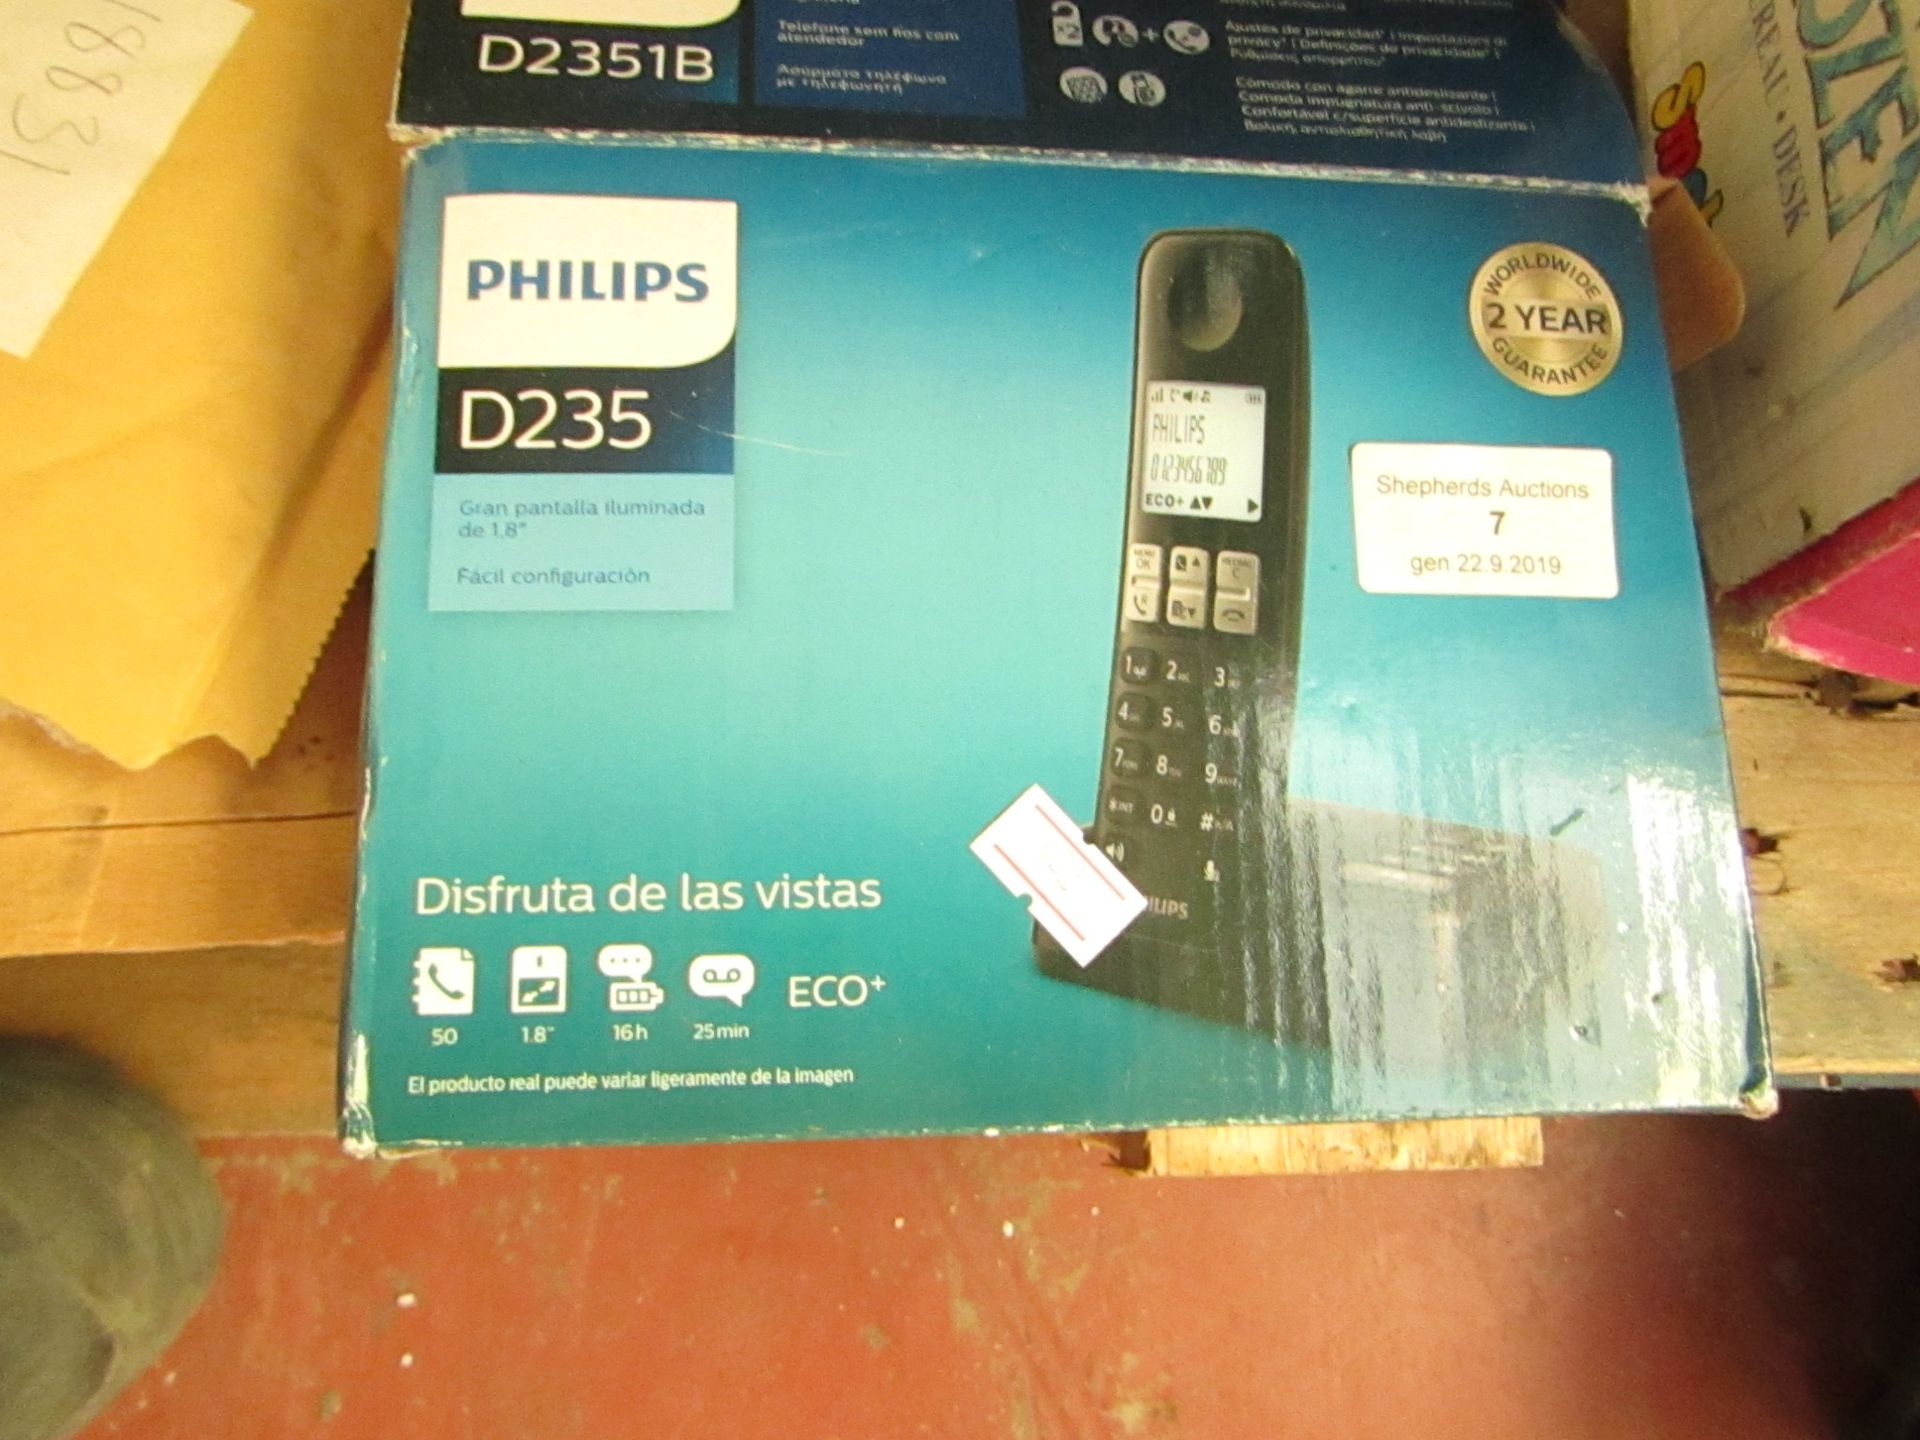 Philips D235 cordless home phone, untested and boxed.